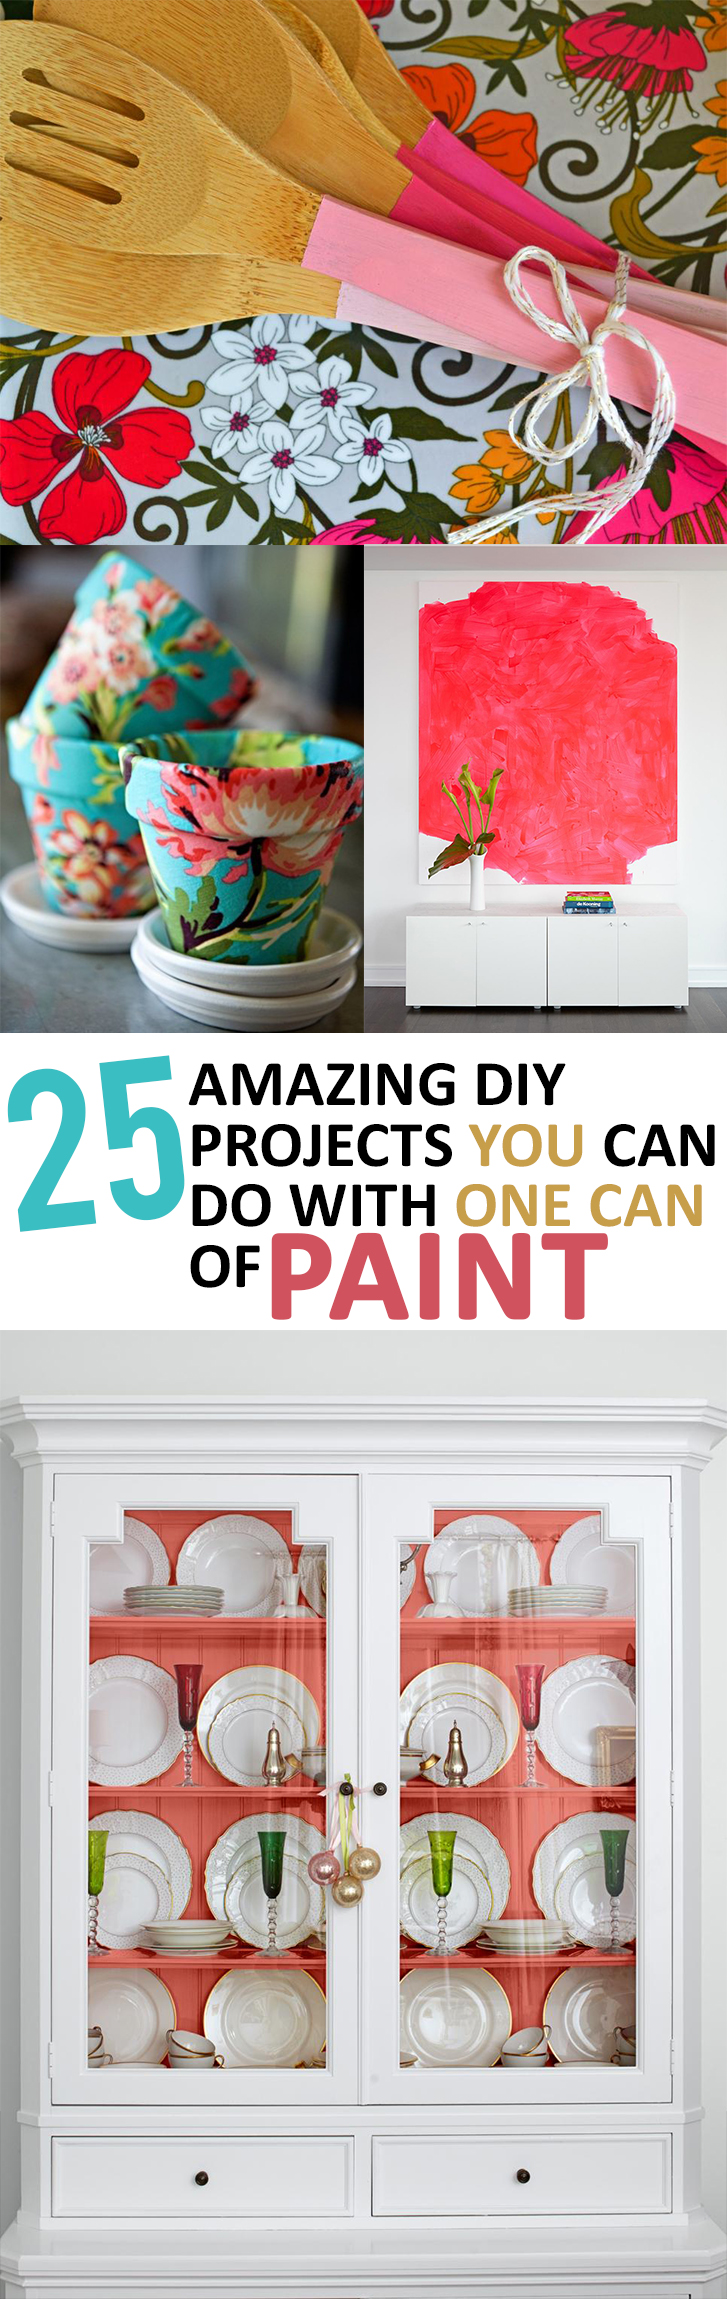 DIY projects, DIY paint projects, popular pin, home DIY, home projects, easy home decor, home decor ideas, DIY.